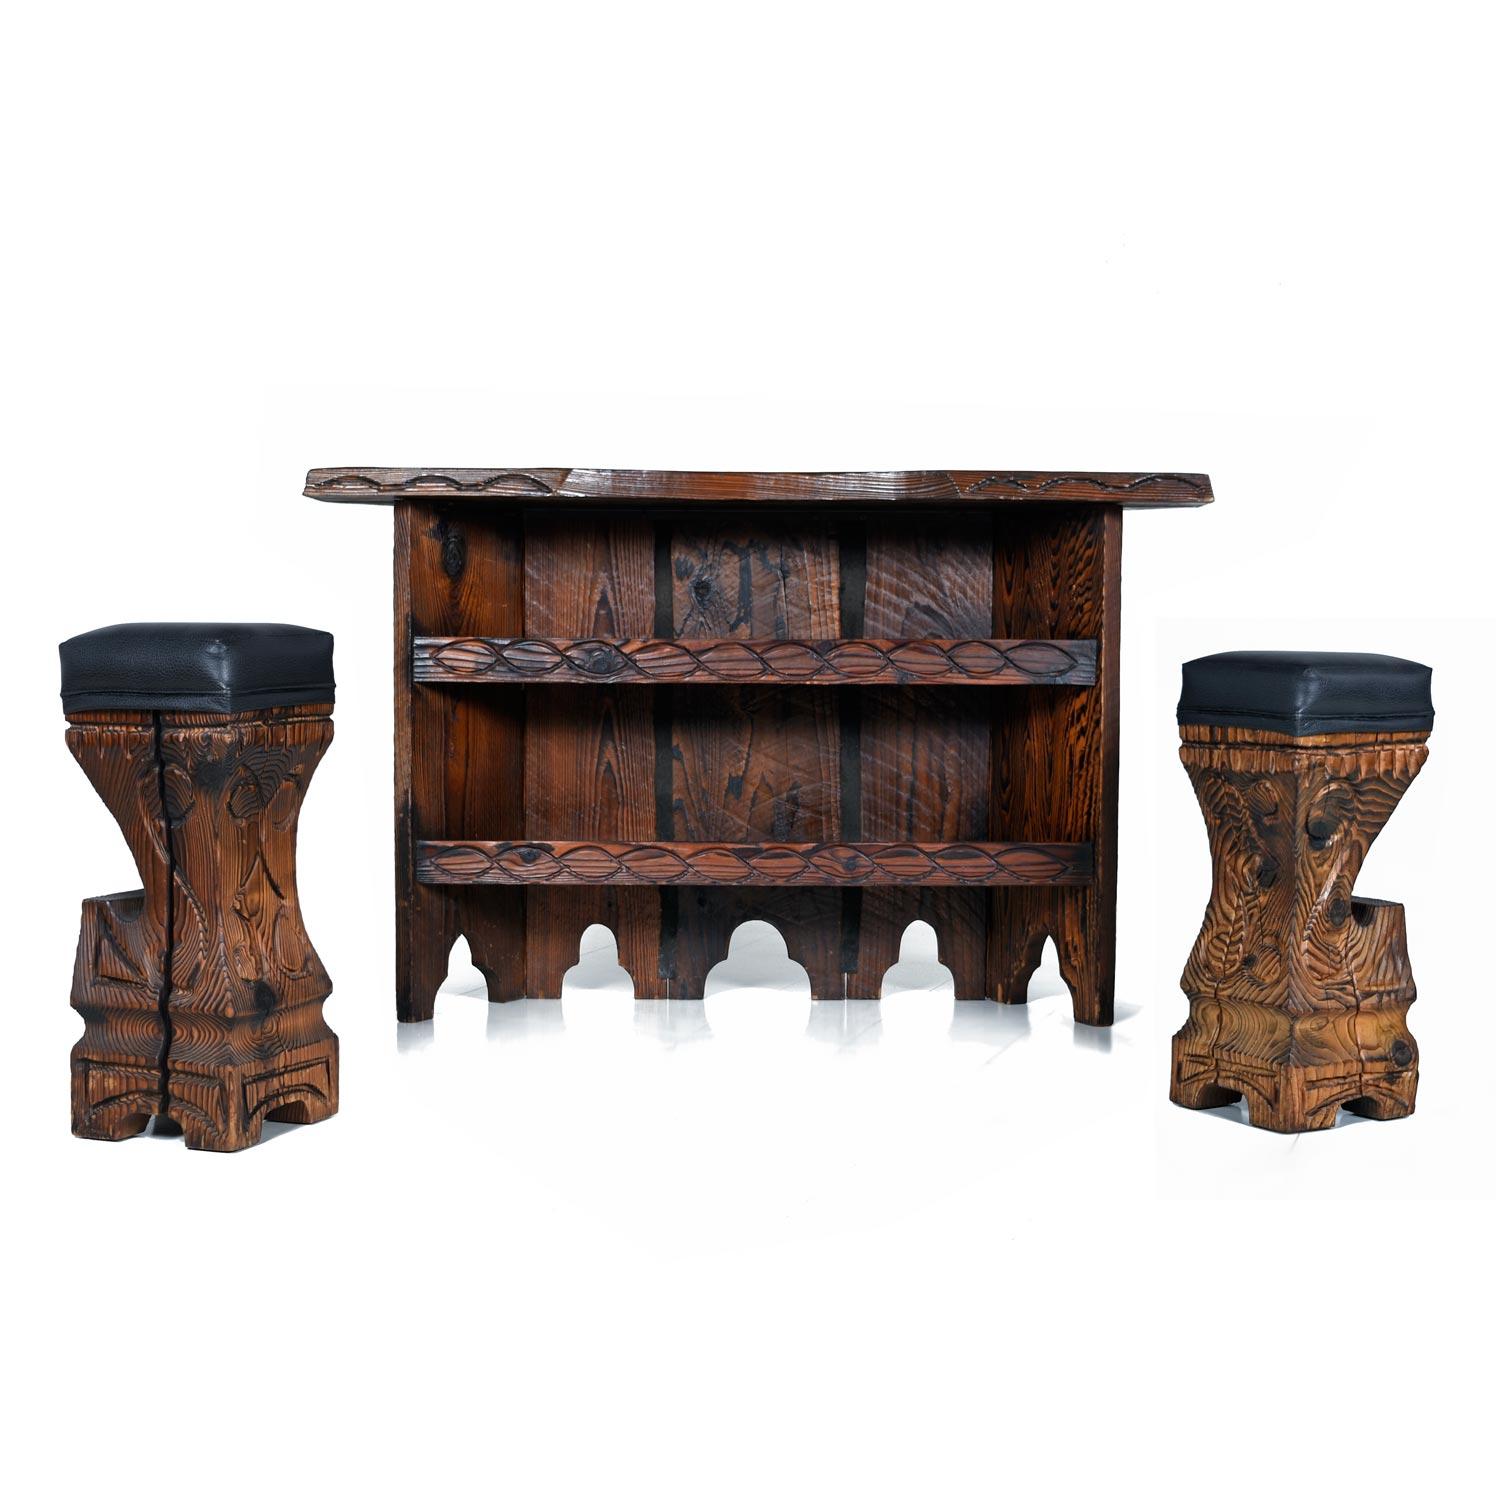 Take a walk on the wild side, or maybe just have a drink there, with this fabulous tiki bar by Witco. The bar and stools are substantial, manufactured of thick slabs of cedar wood. Each stool has been recovered in a high-quality, cruelty free,